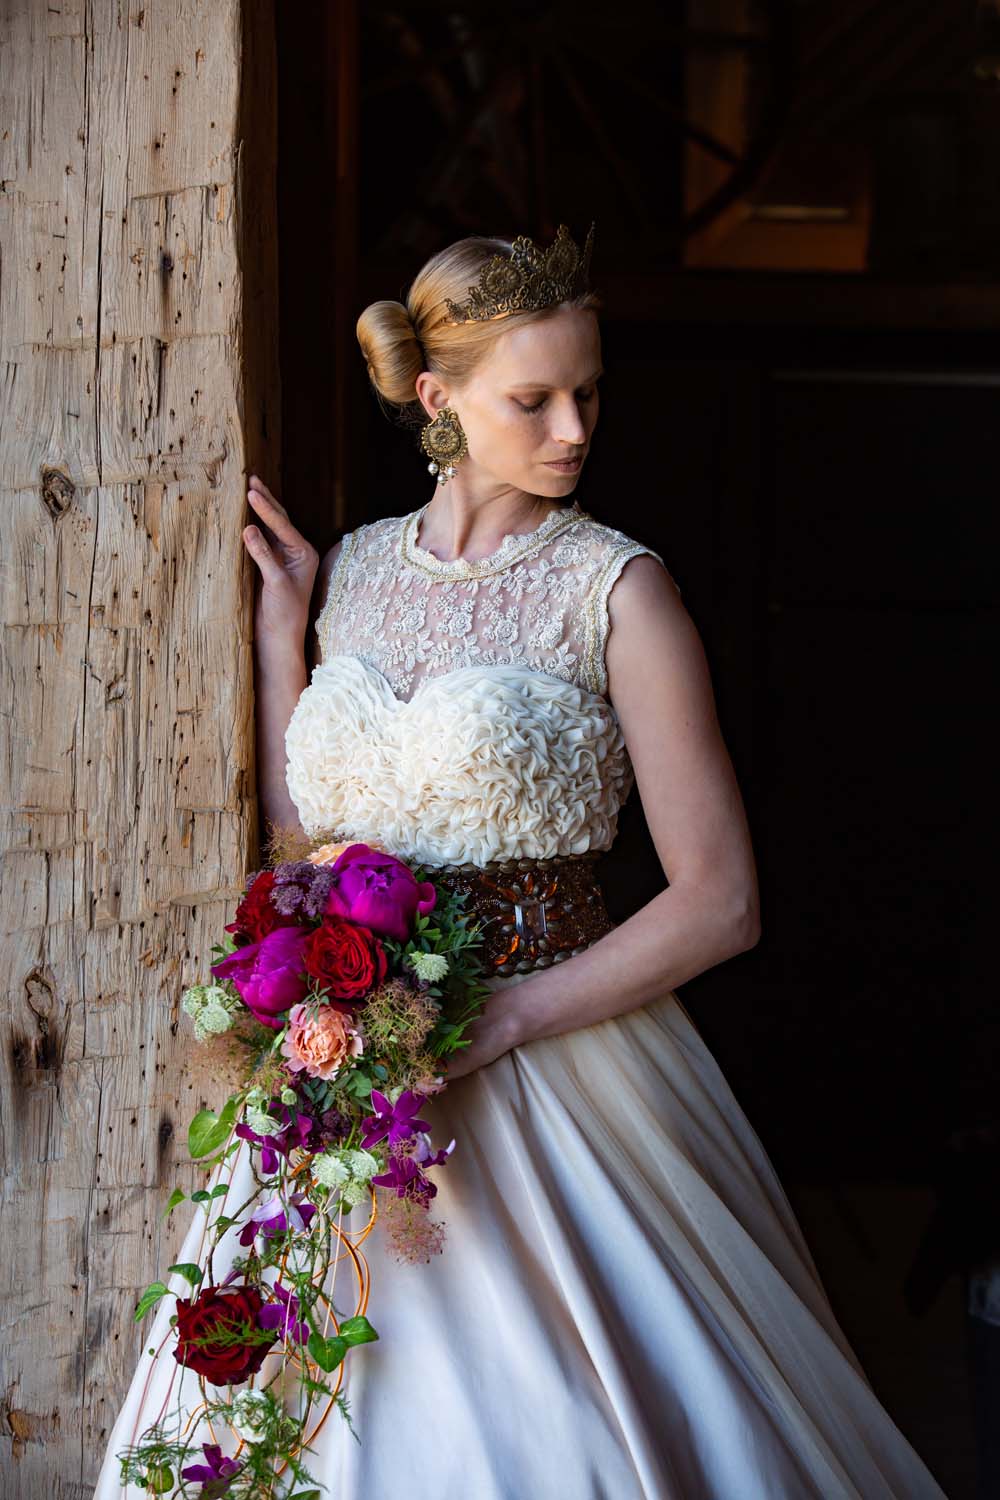 This Styled Shoot Was Inspired By Medieval Royalty - bride